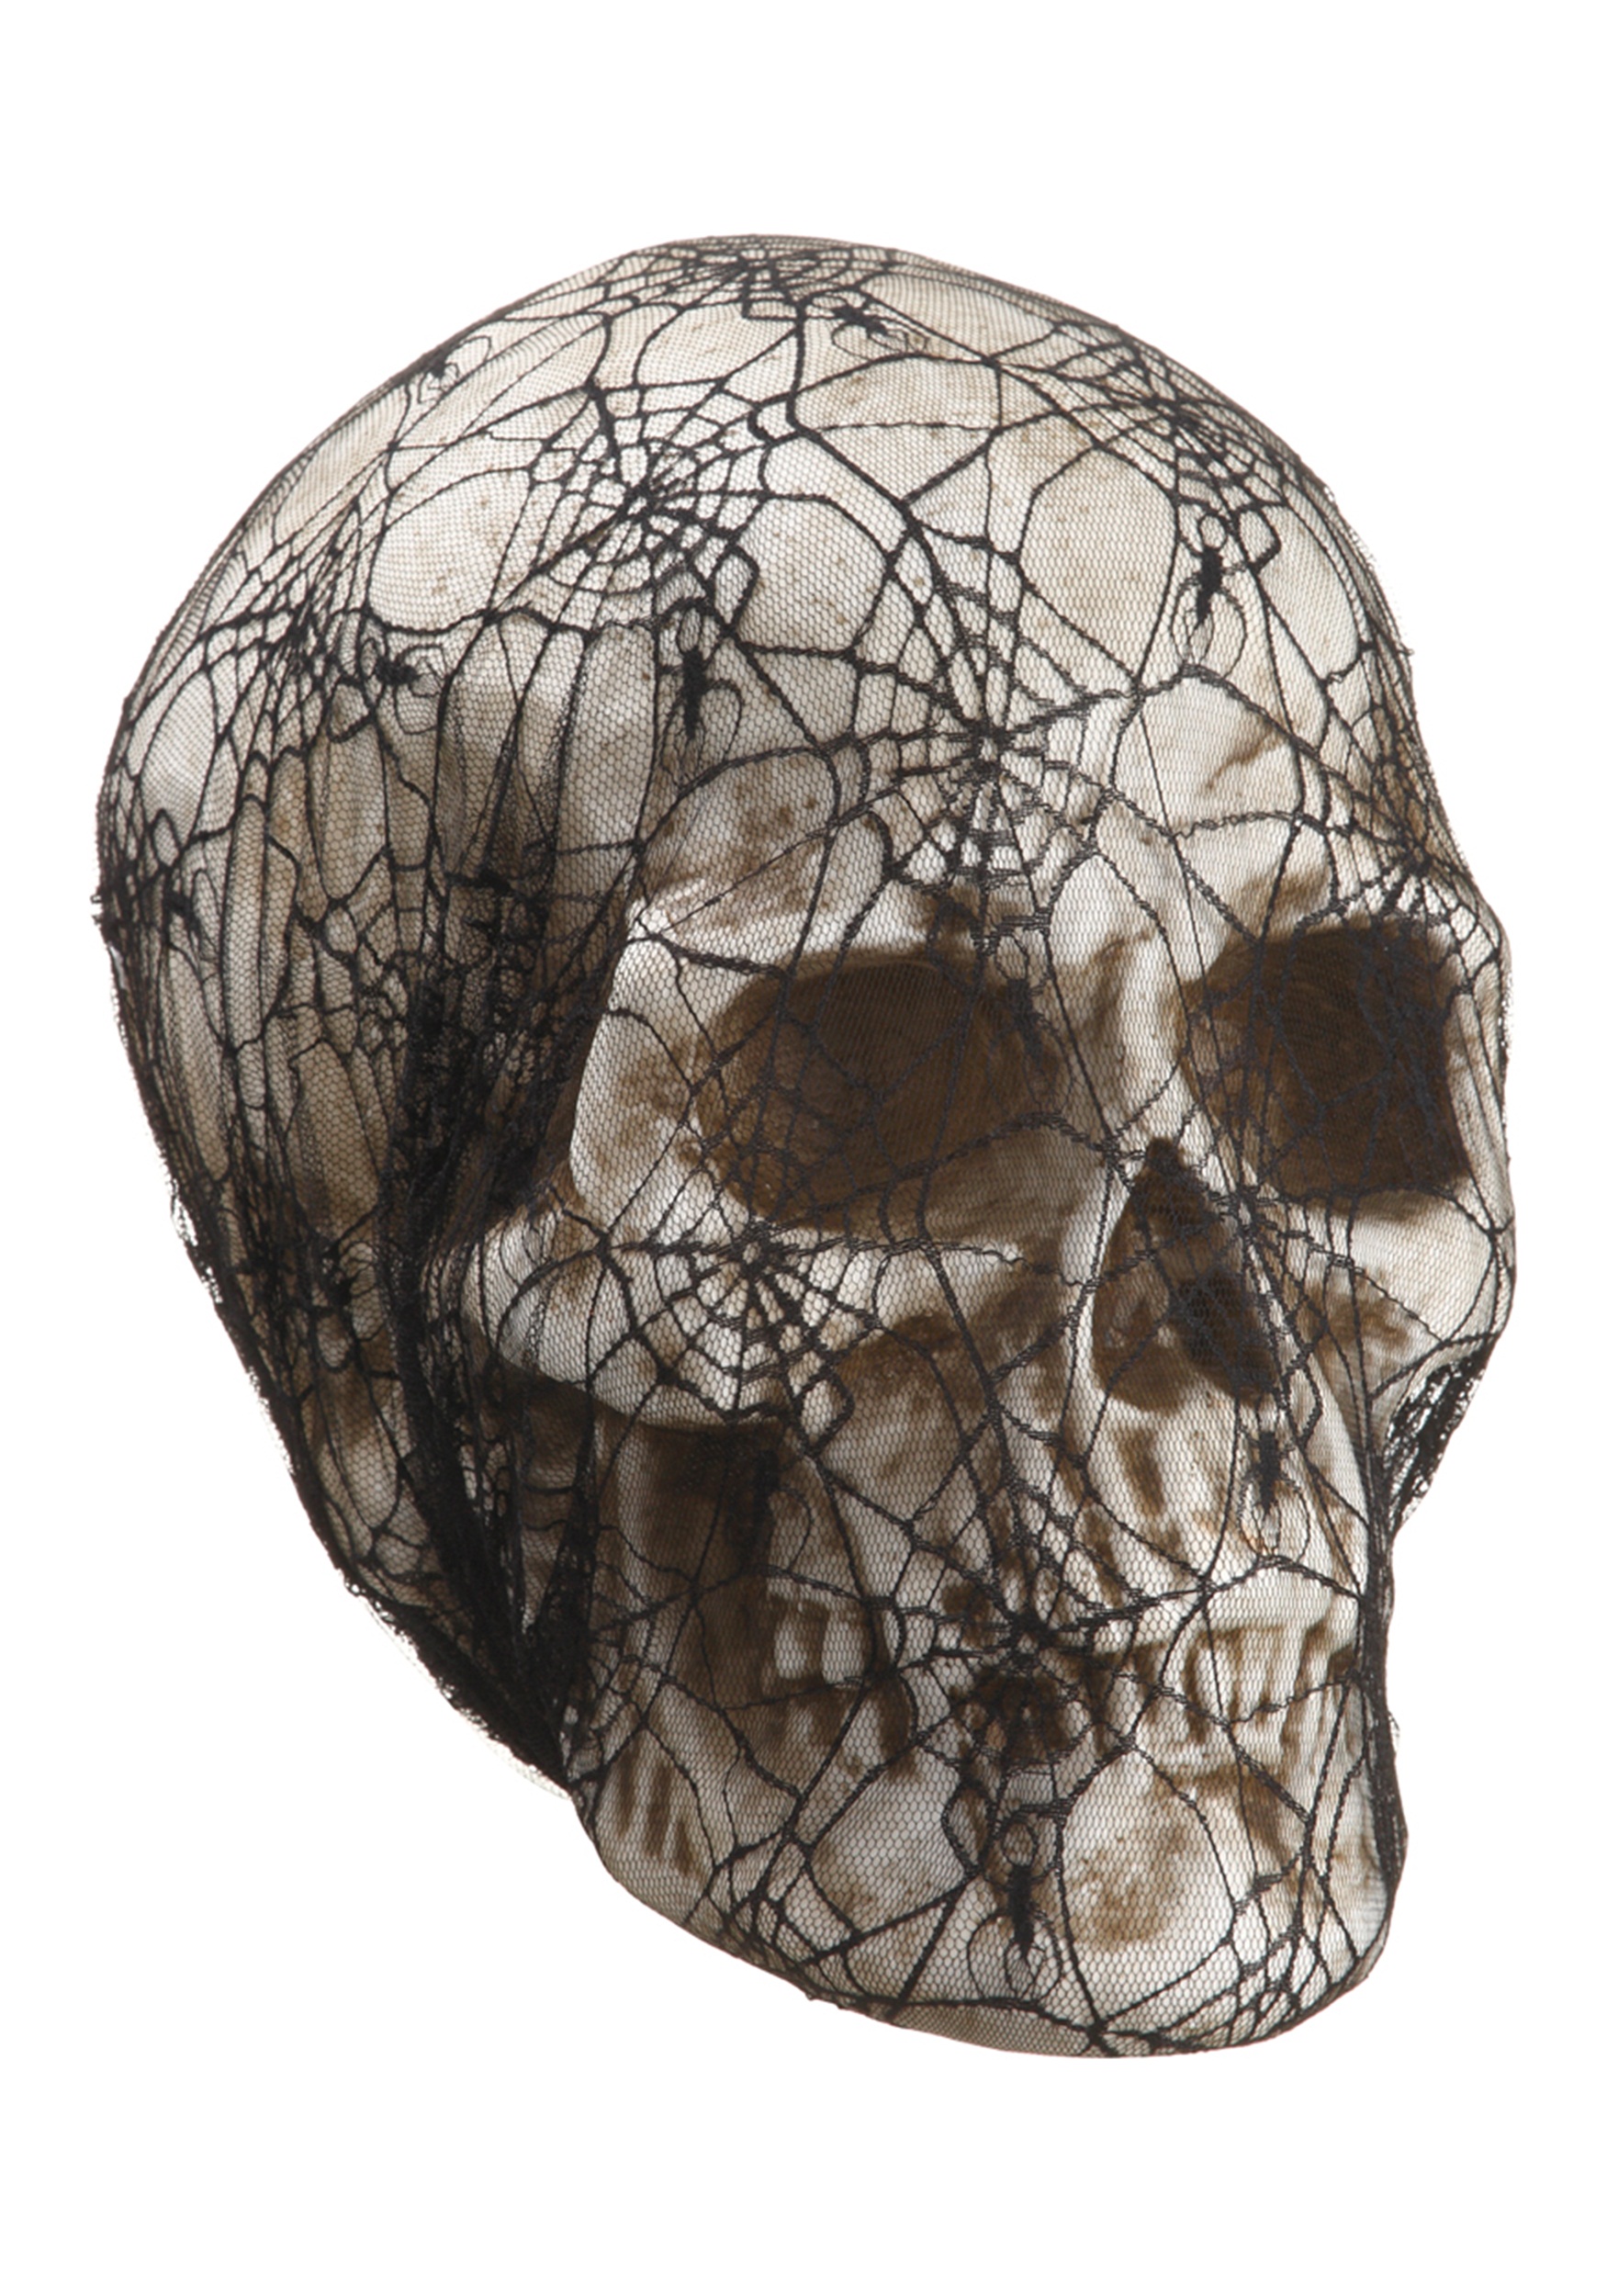 14 inch Laced Spider Web Skull